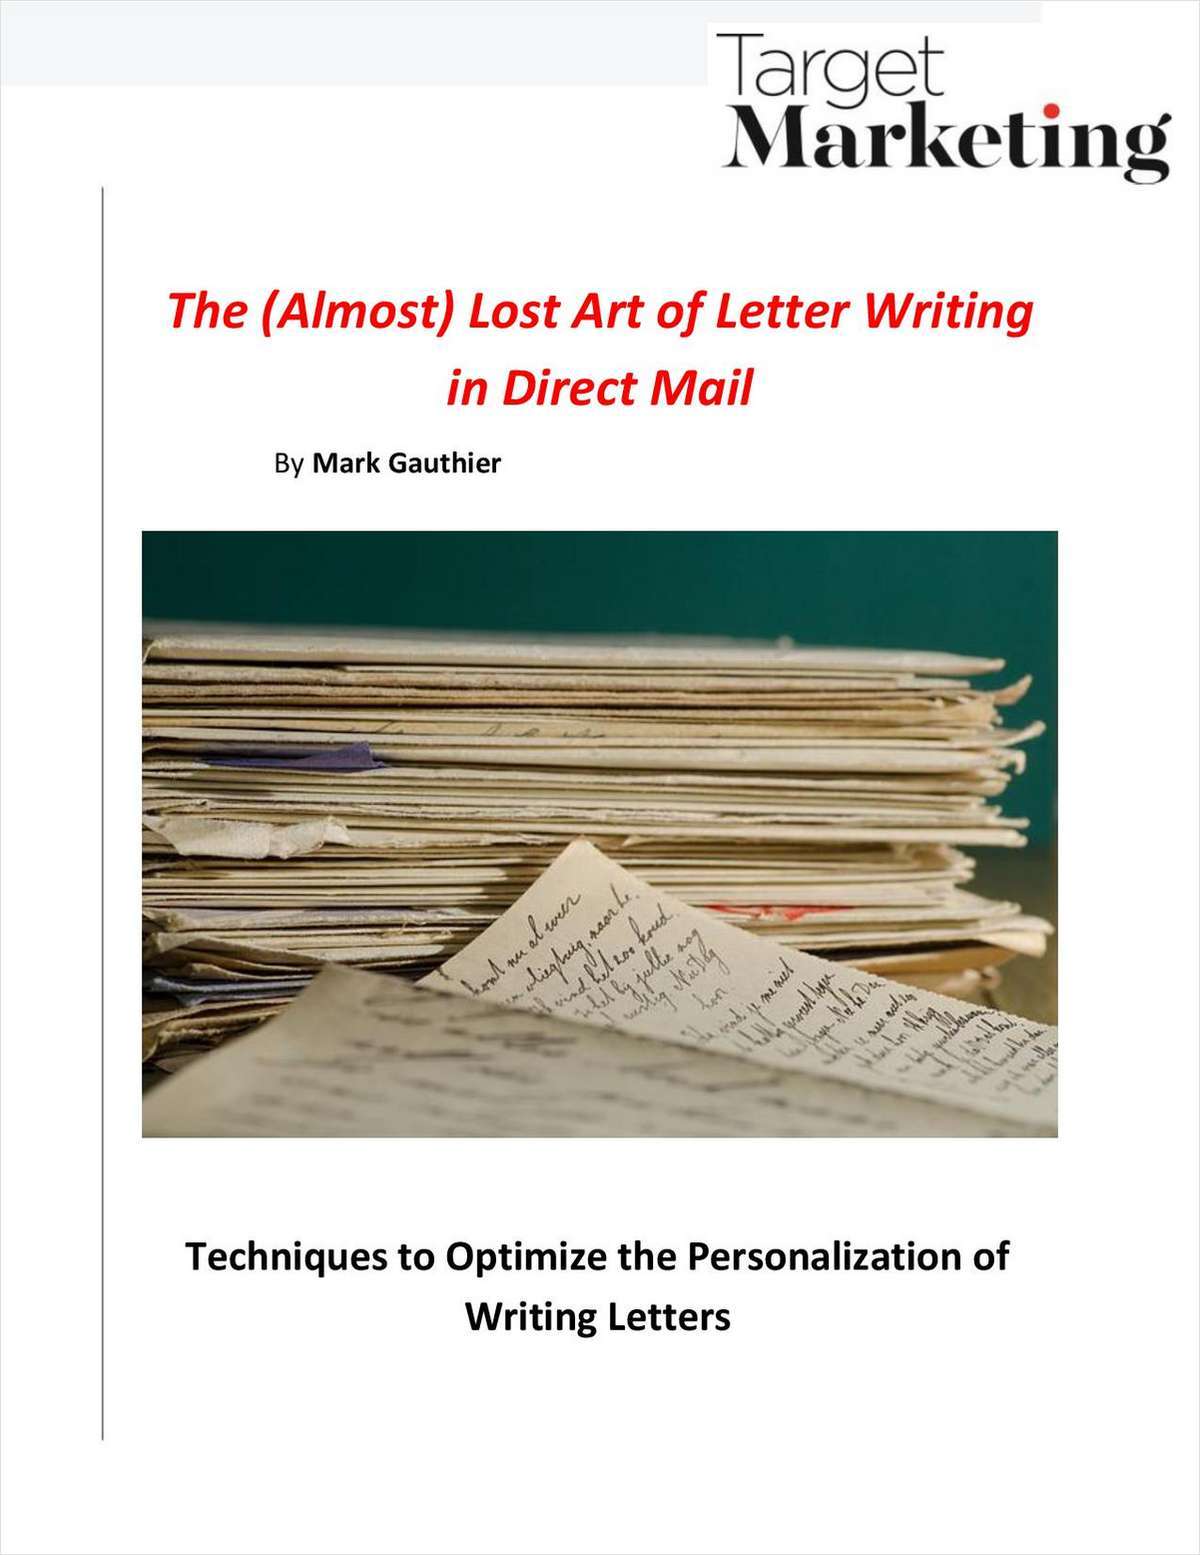 The (Almost) Lost Art of Letter Writing in Direct Mail